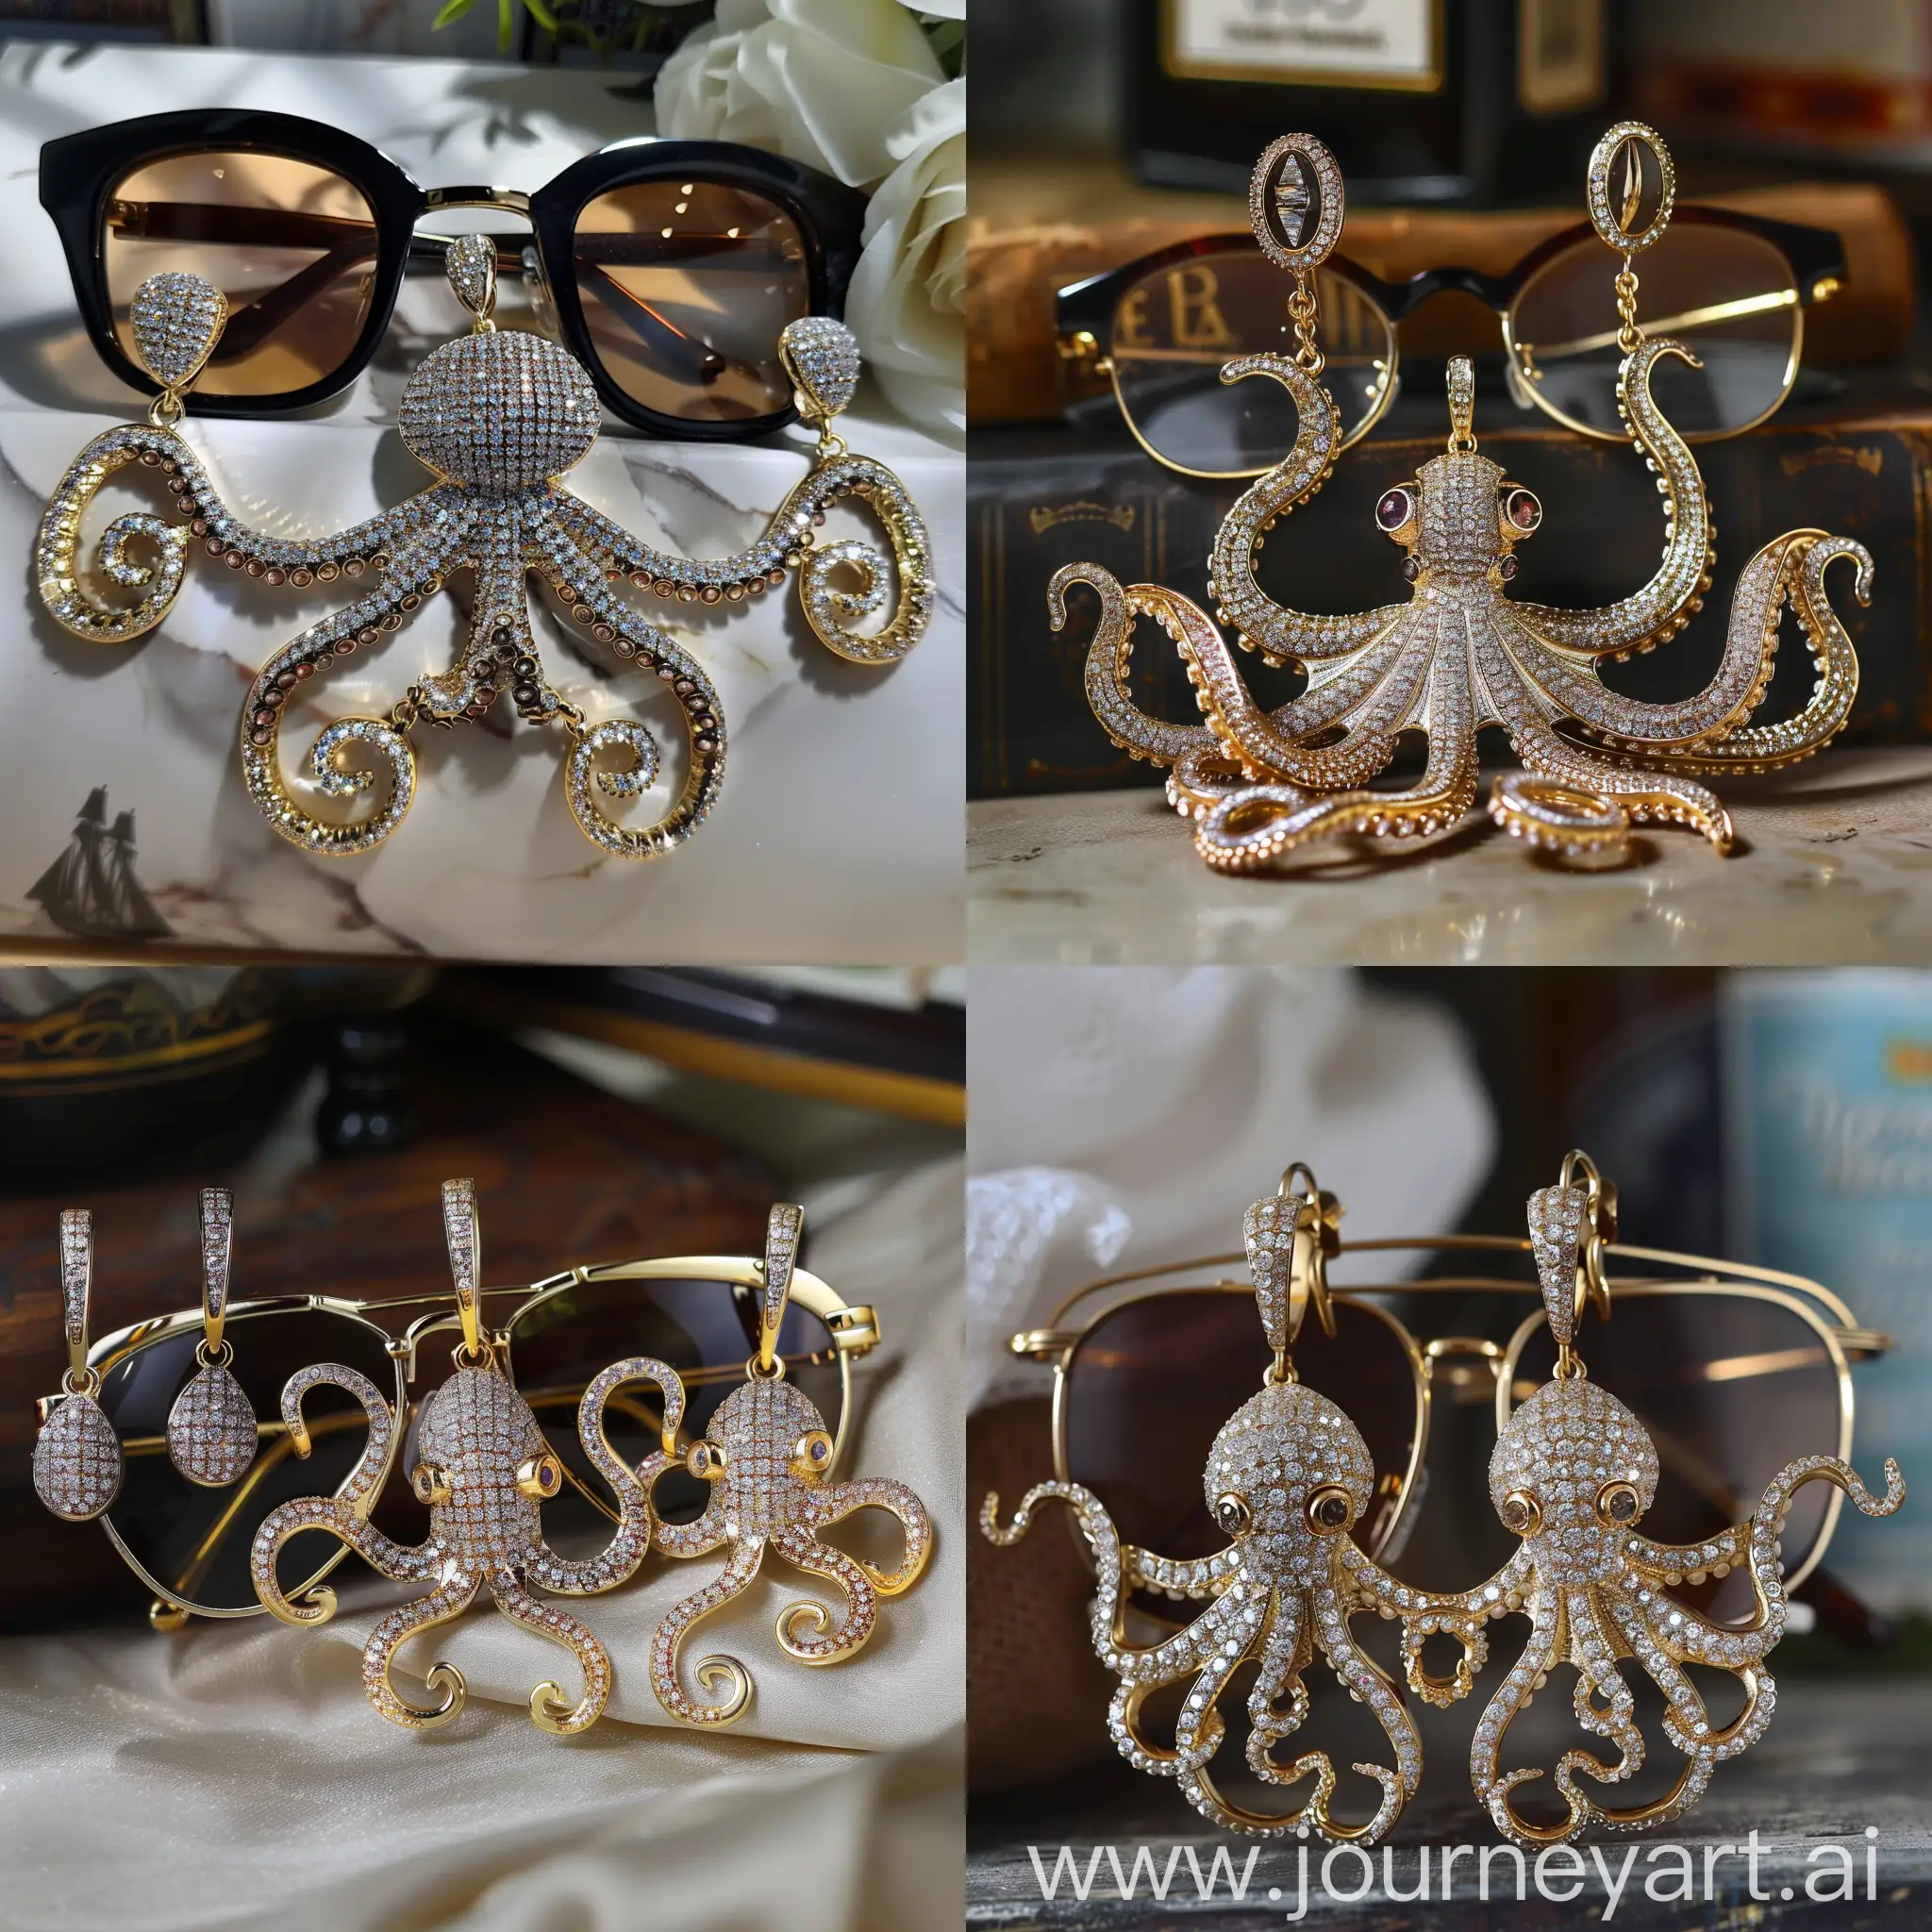 Luxurious-OctopusShaped-Gold-Jewelry-Set-with-Jeweled-Arms-and-Fancy-Eyes-Glasses